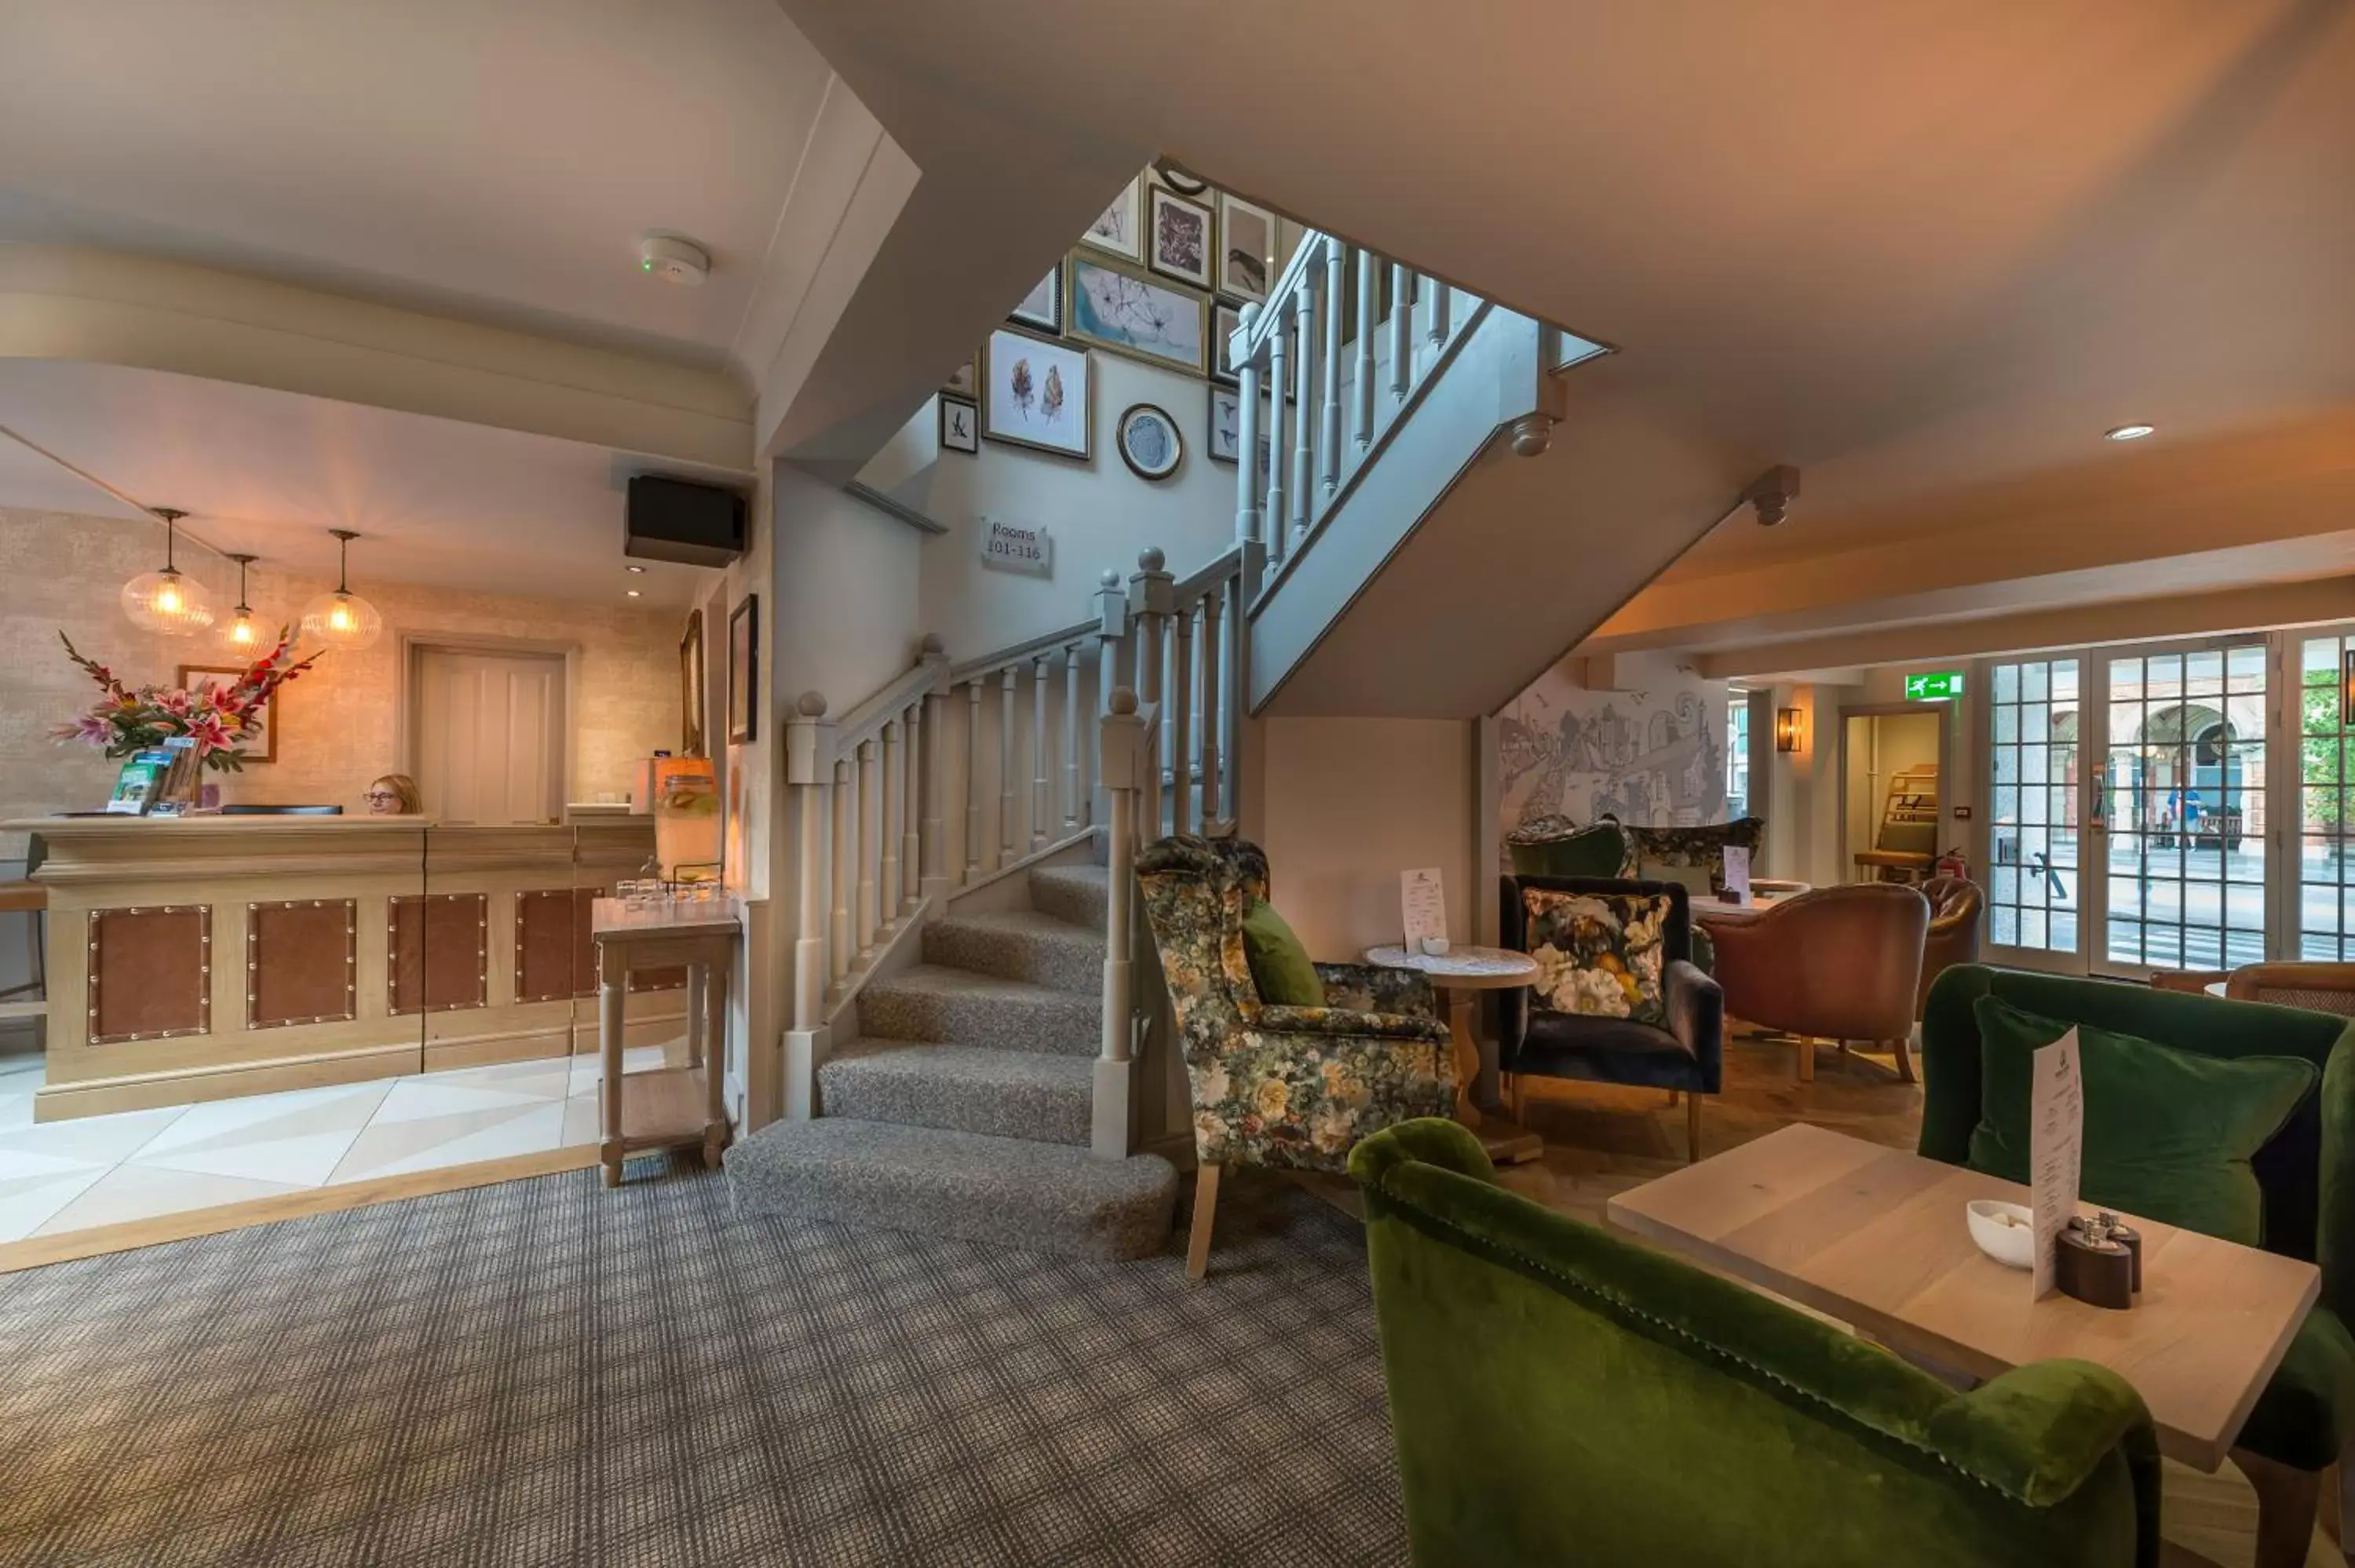 Lobby/Reception in The Three Swans Hotel, Hungerford, Berkshire